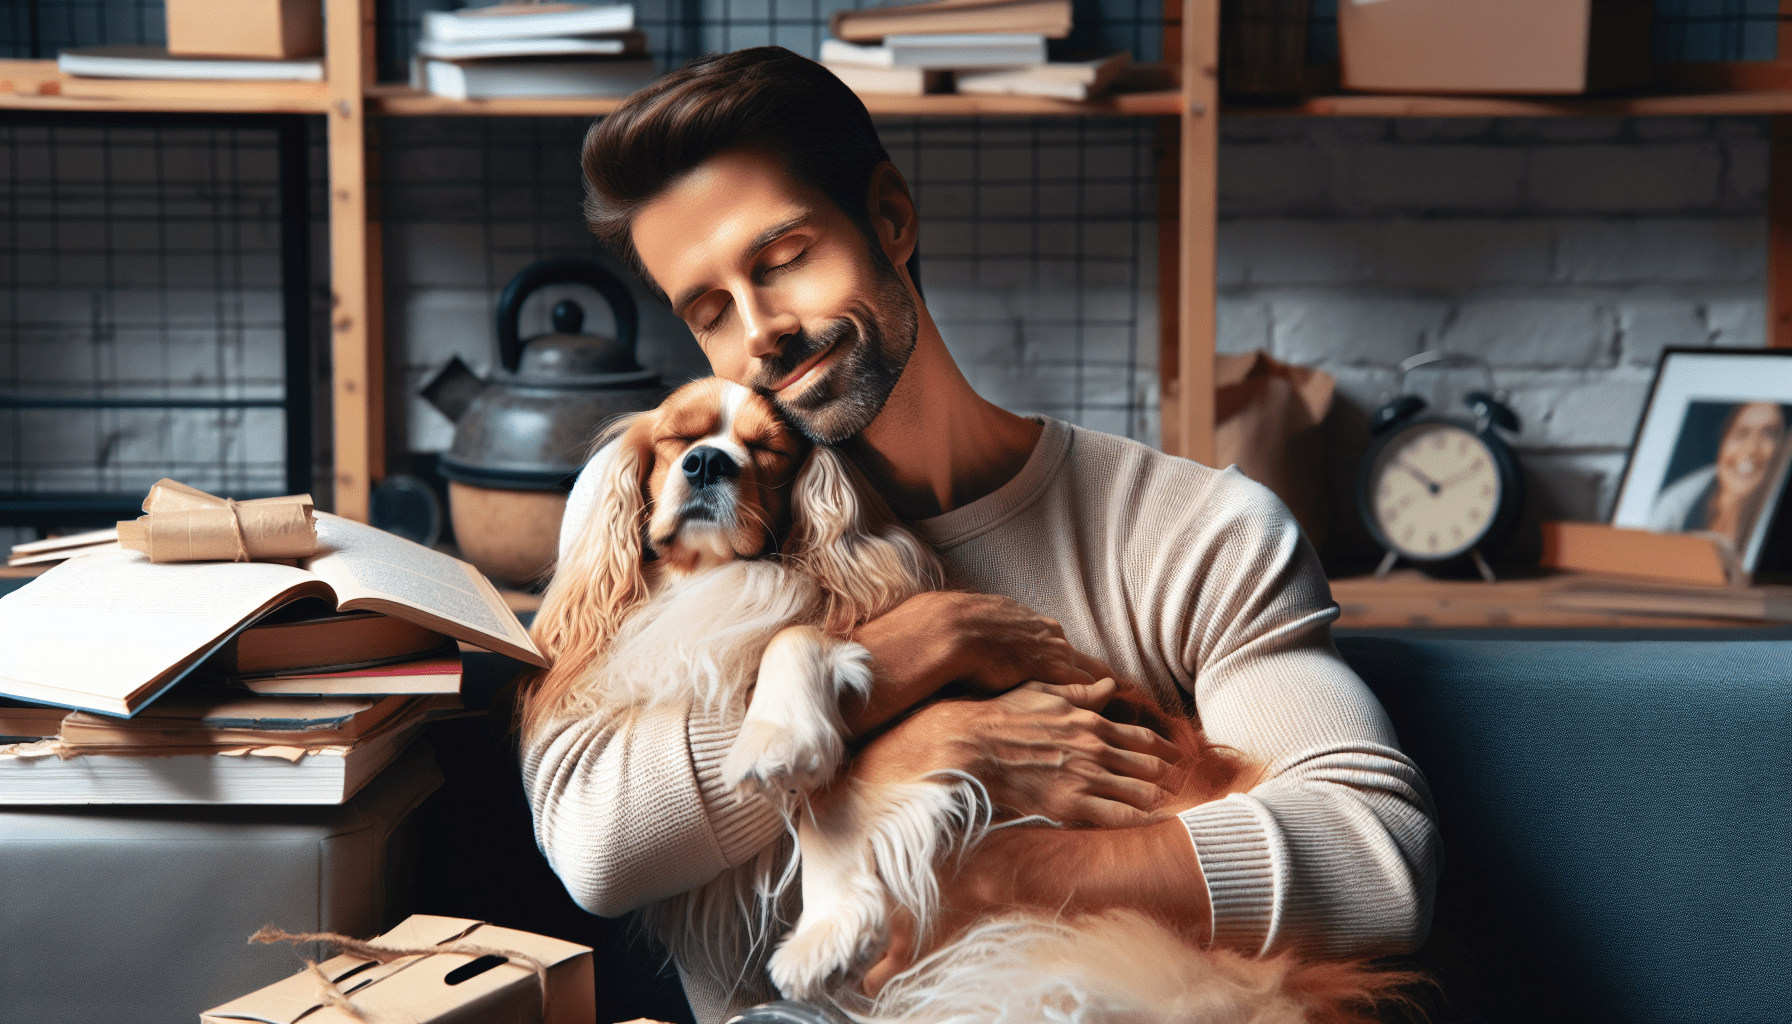 Man with a beard affectionately hugging a Cavalier King Charles Spaniel in a cozy room filled with books.